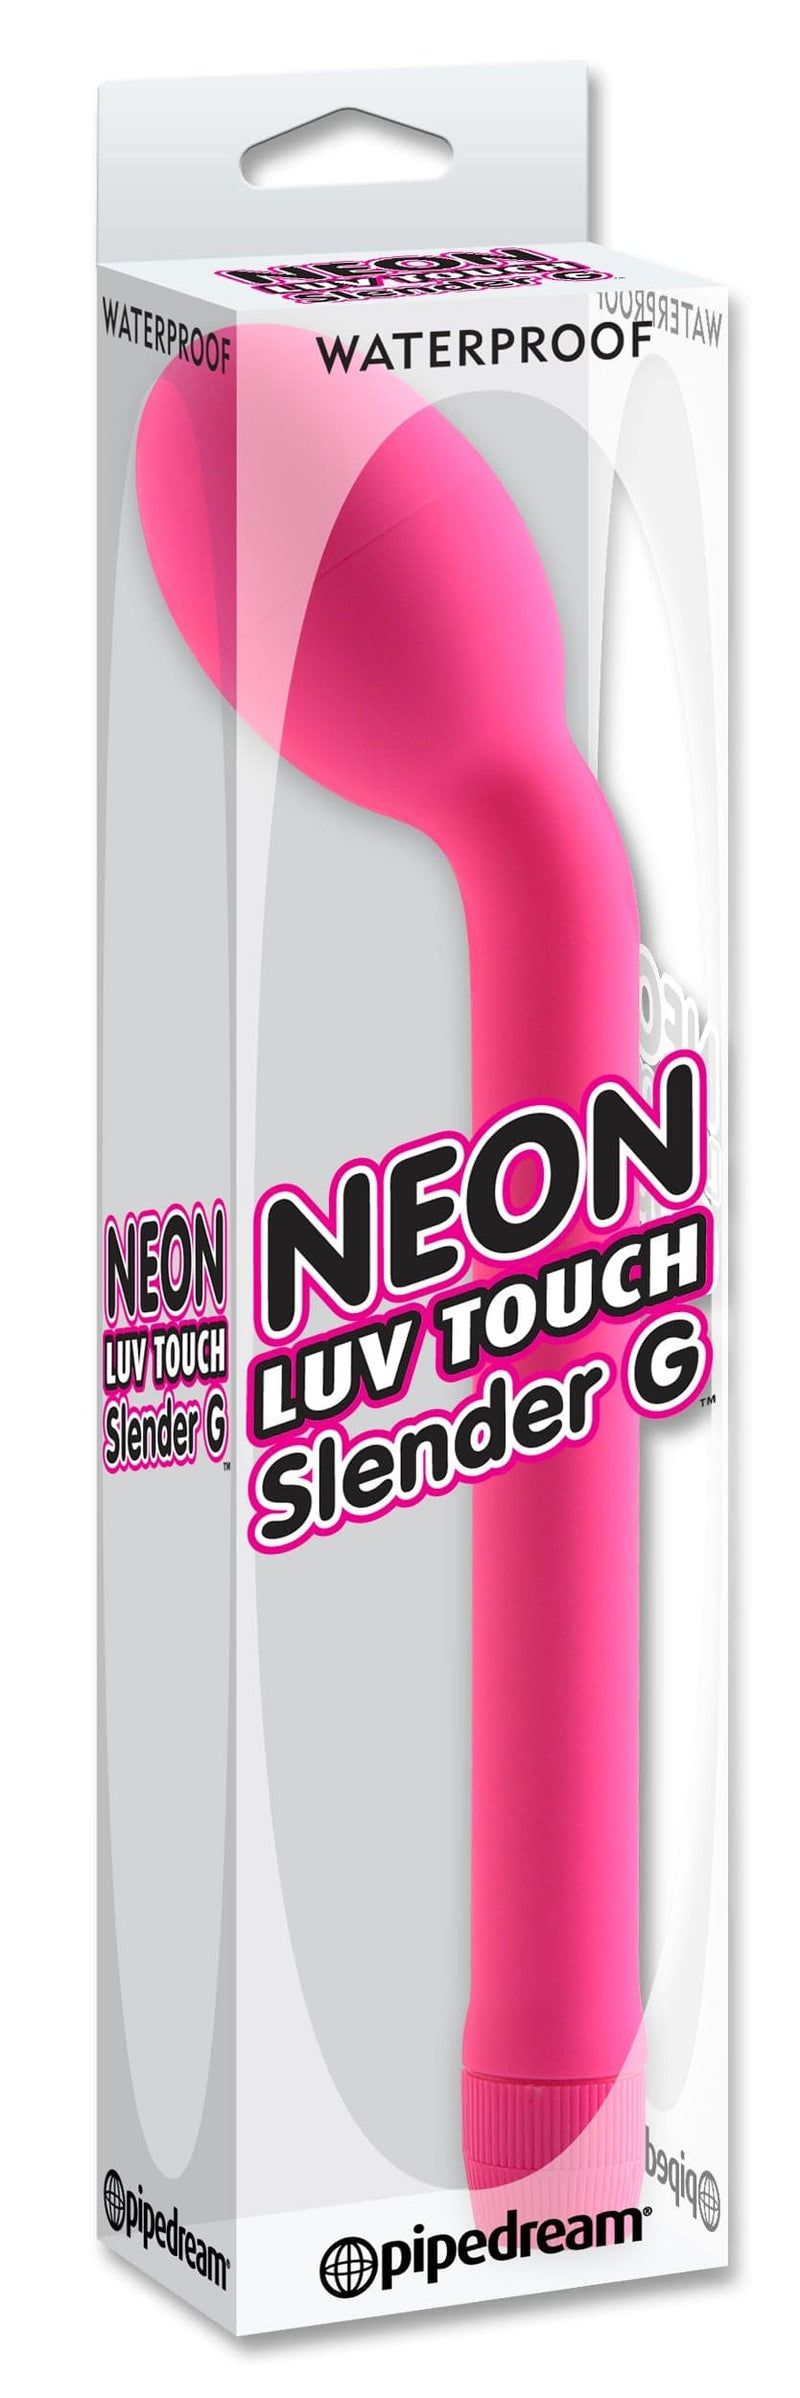 neon-luv-touch-slender-g-pink